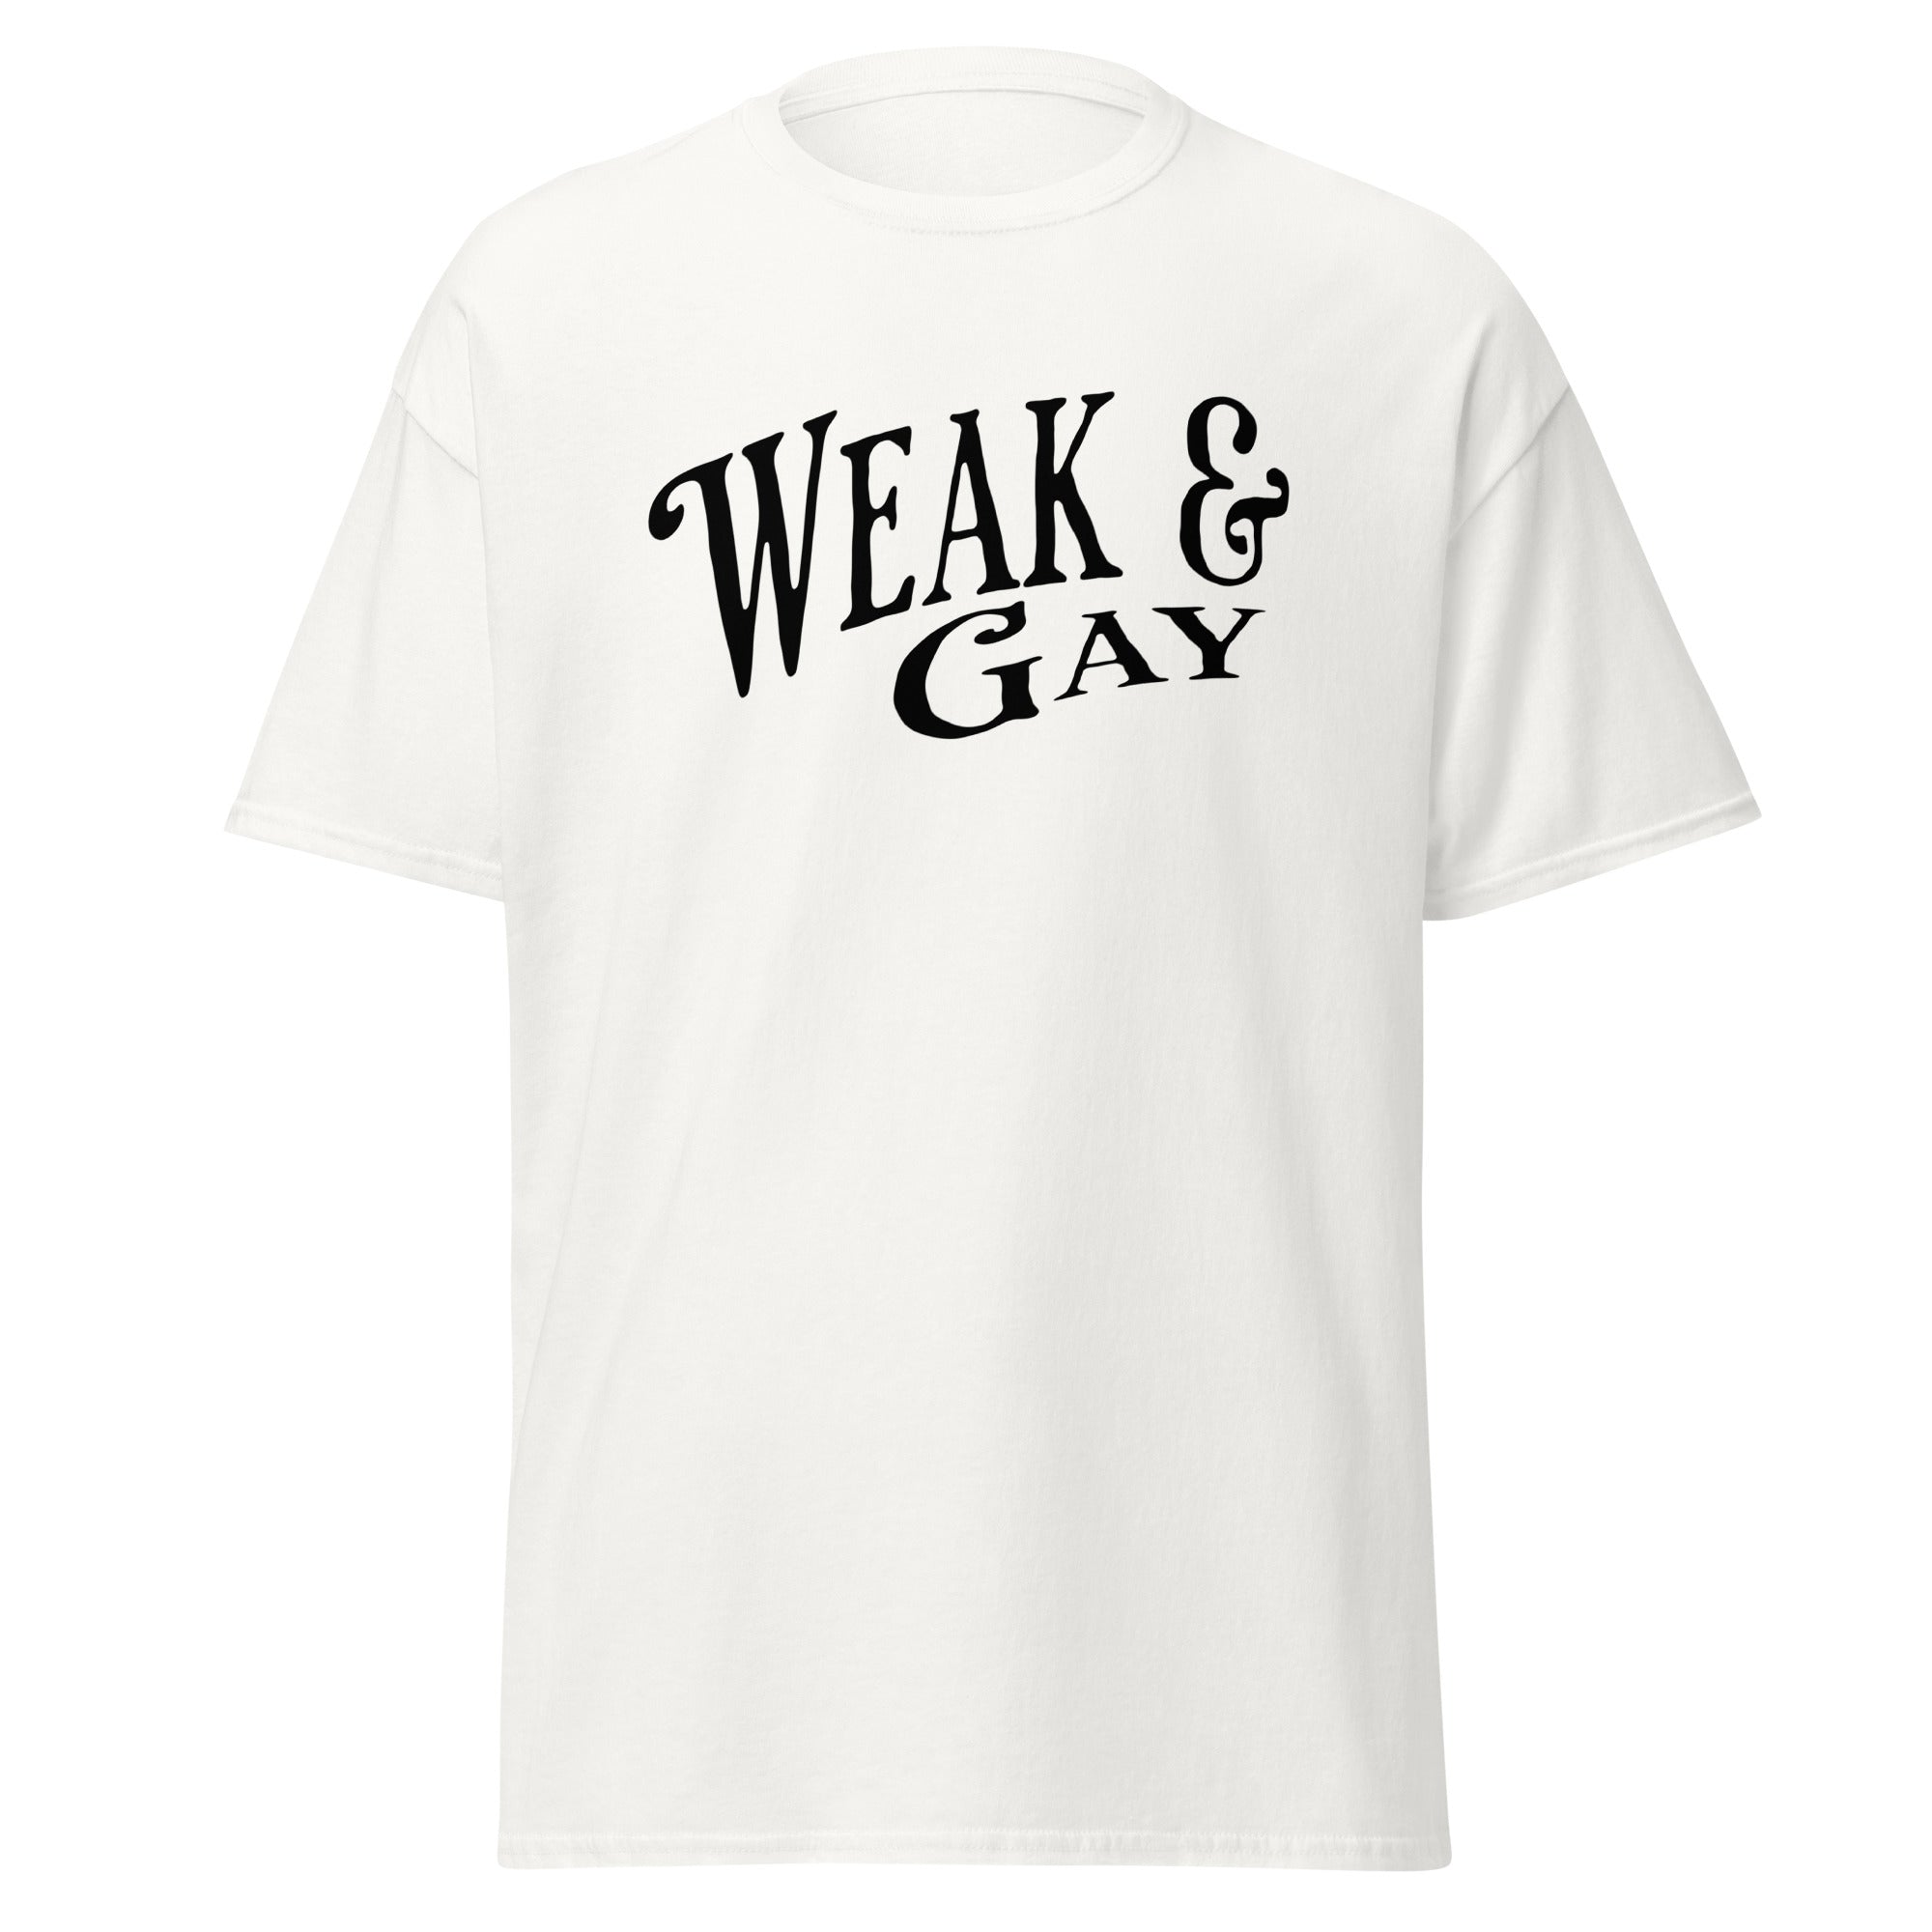 Weak and Gay Republican T-Shirt White